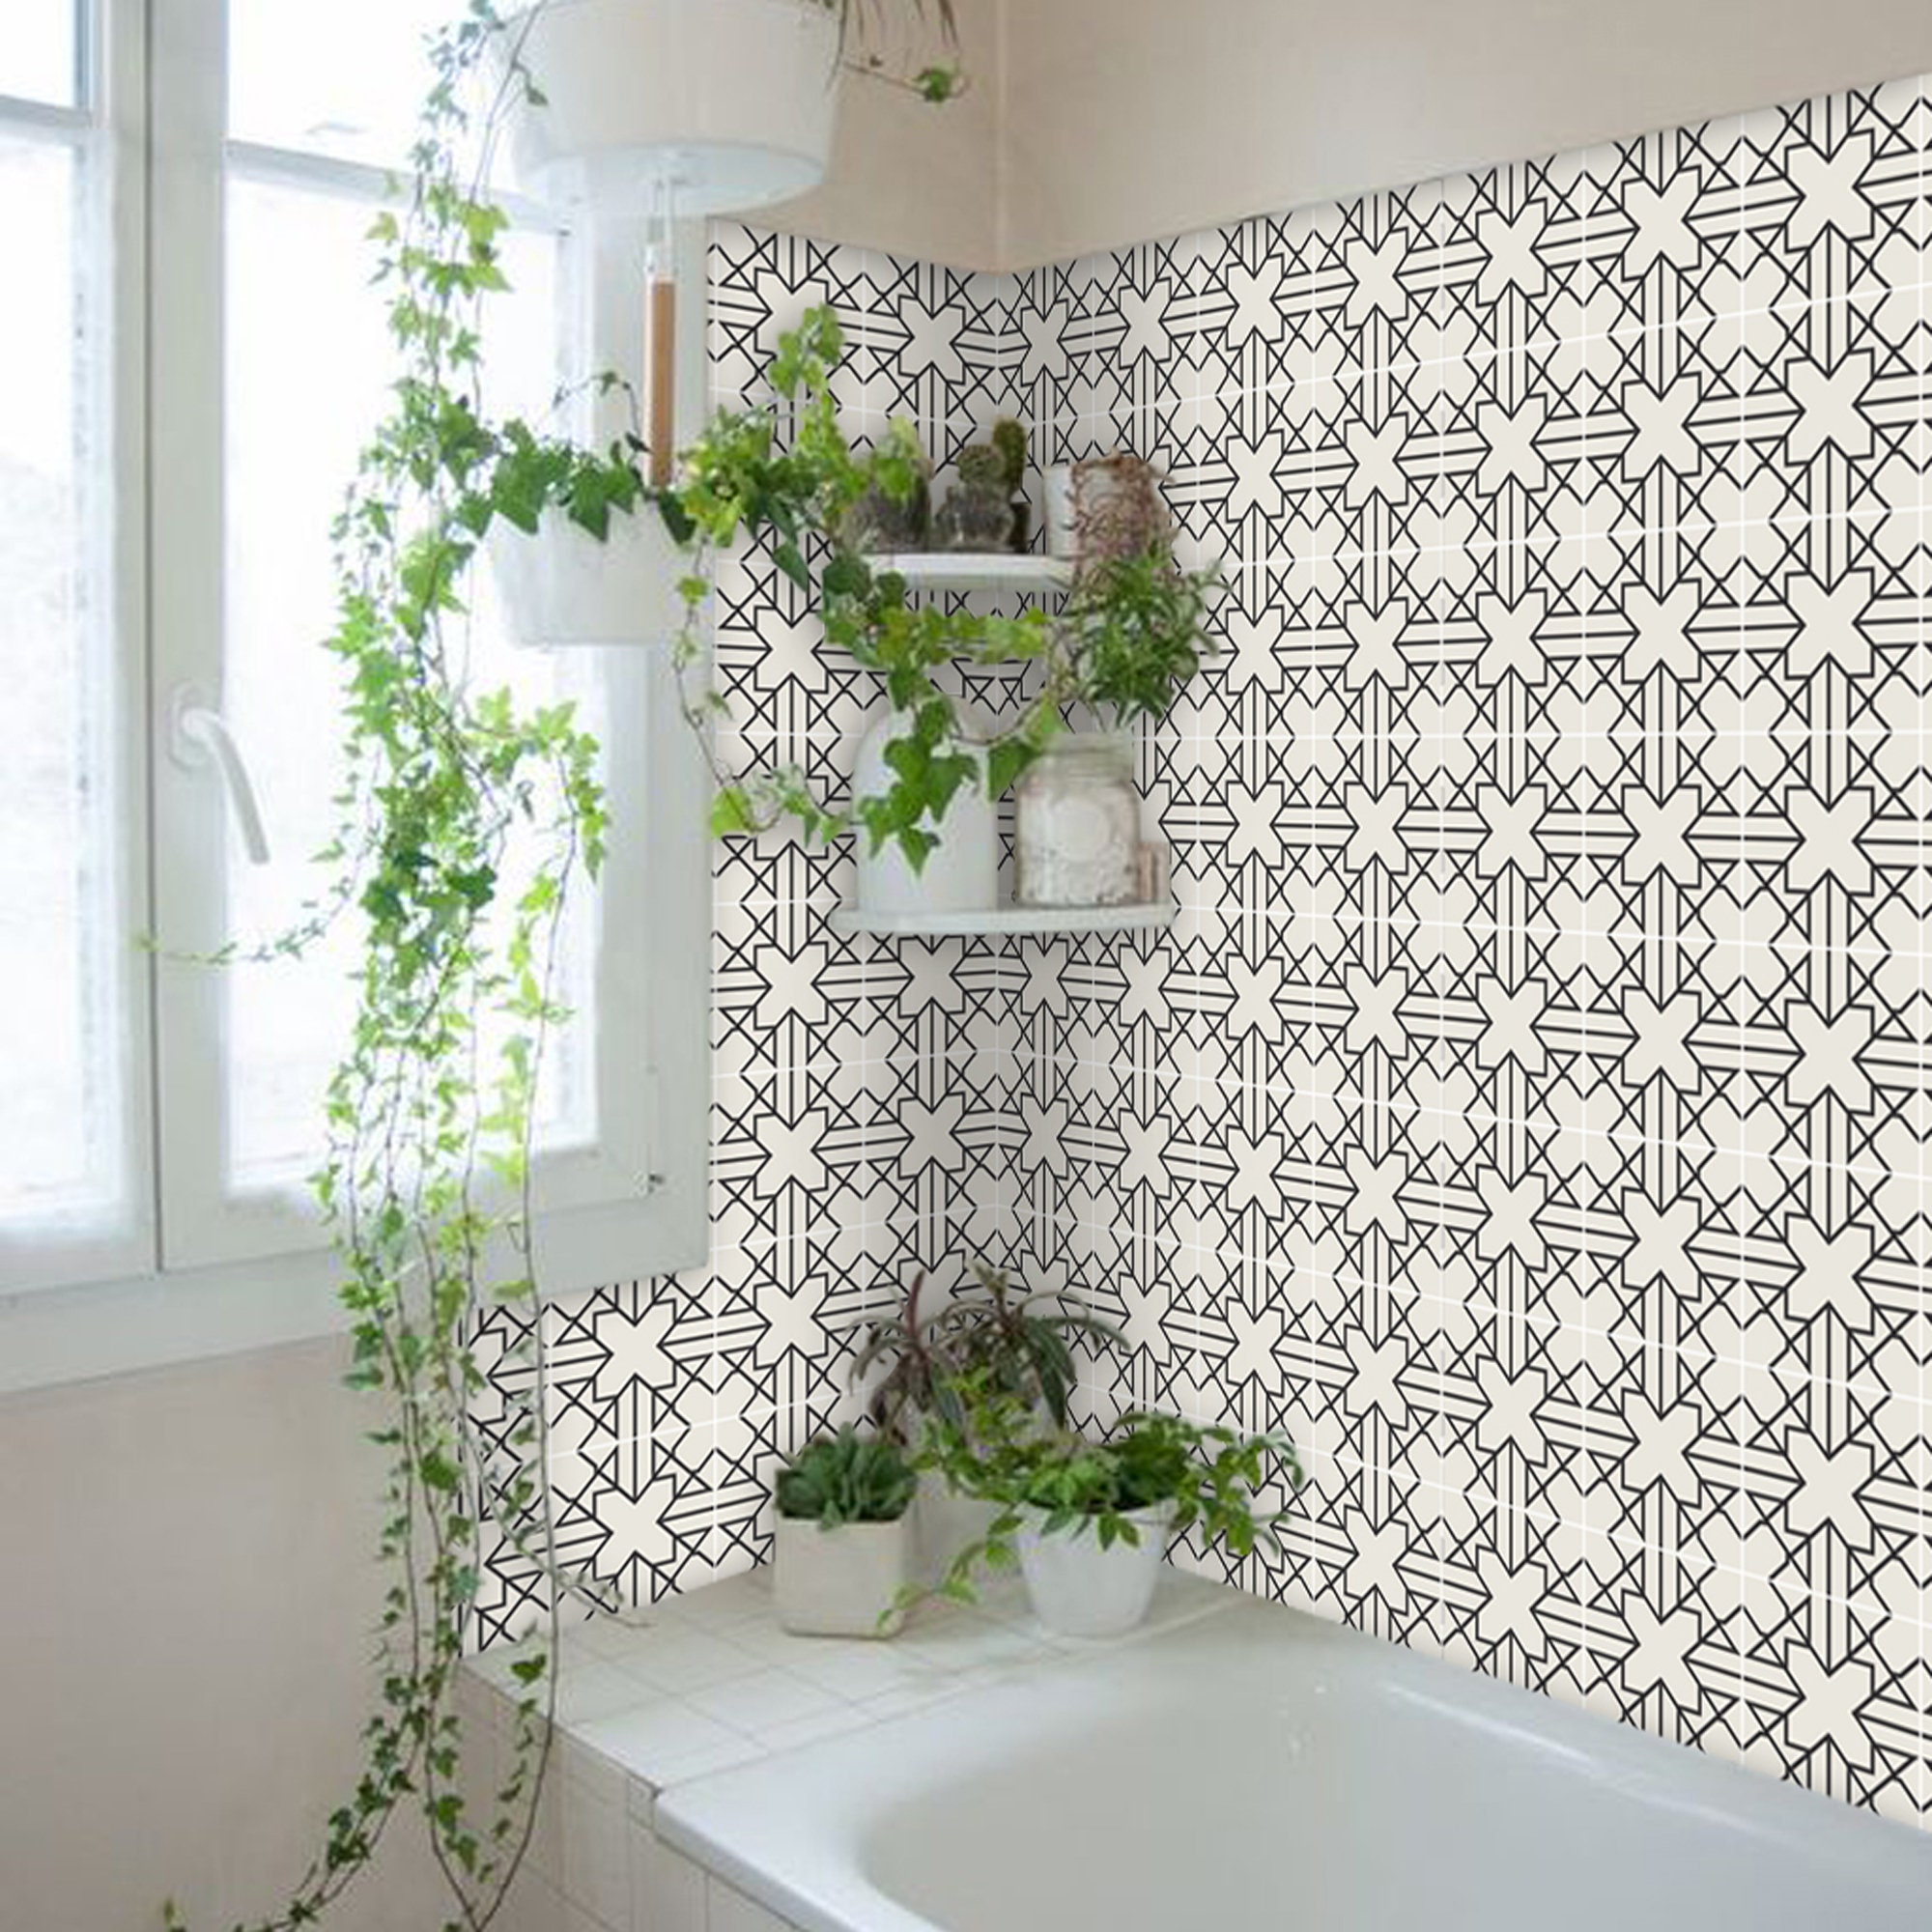 Tile Stickers Tiles For Kitchen, How To Get Stickers Off Bathtub